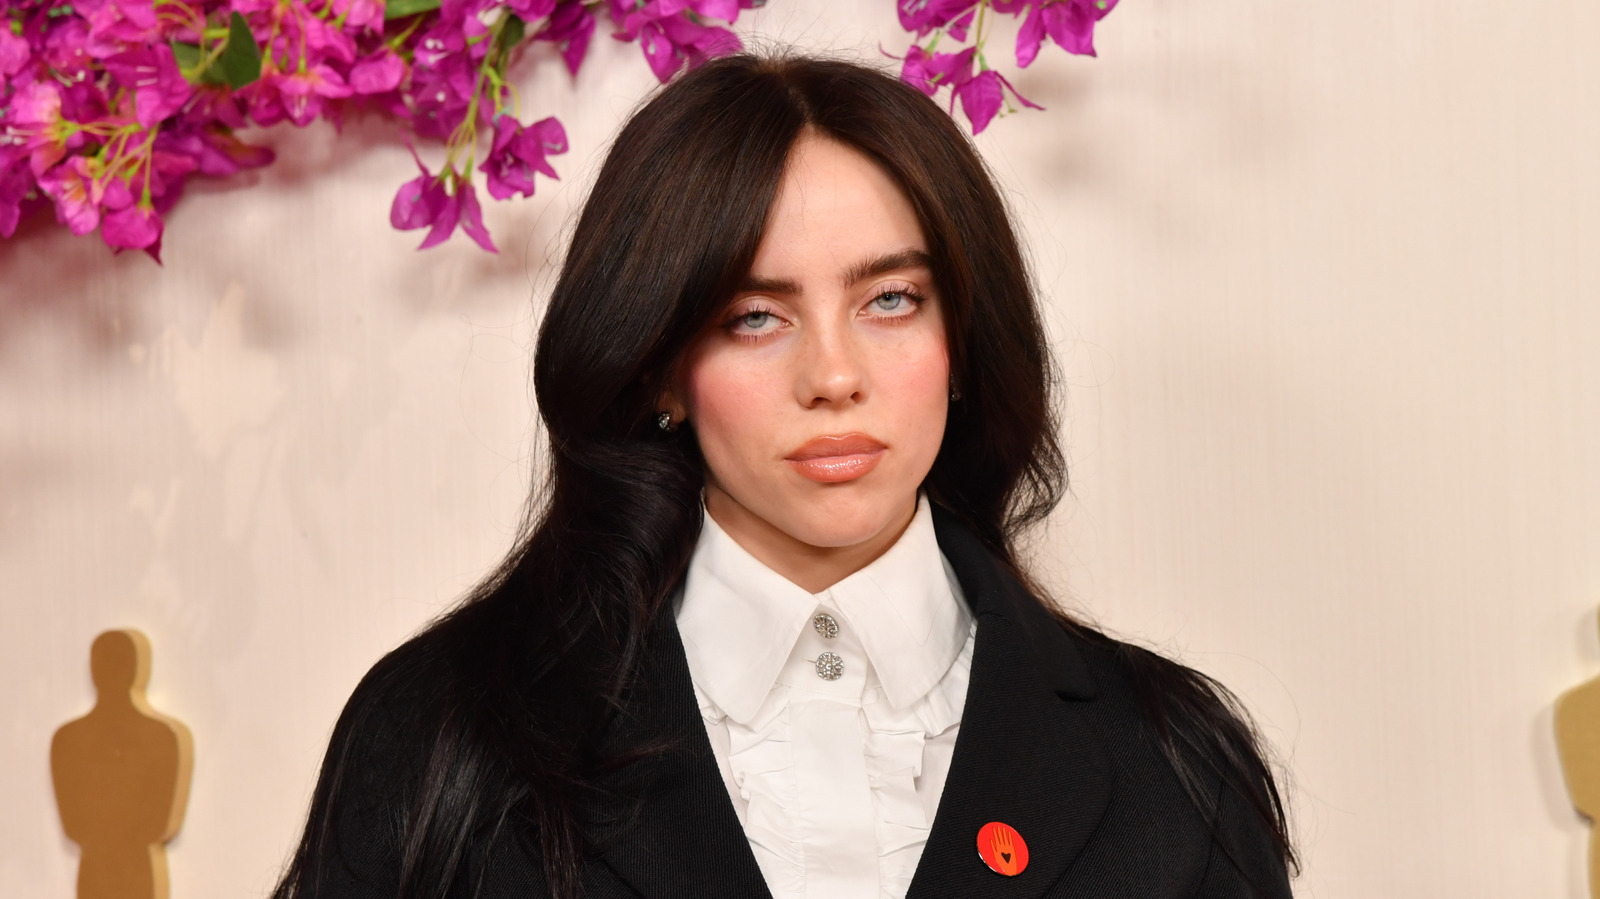 Billie Eilish Is Never Afraid To Be Makeup-Free